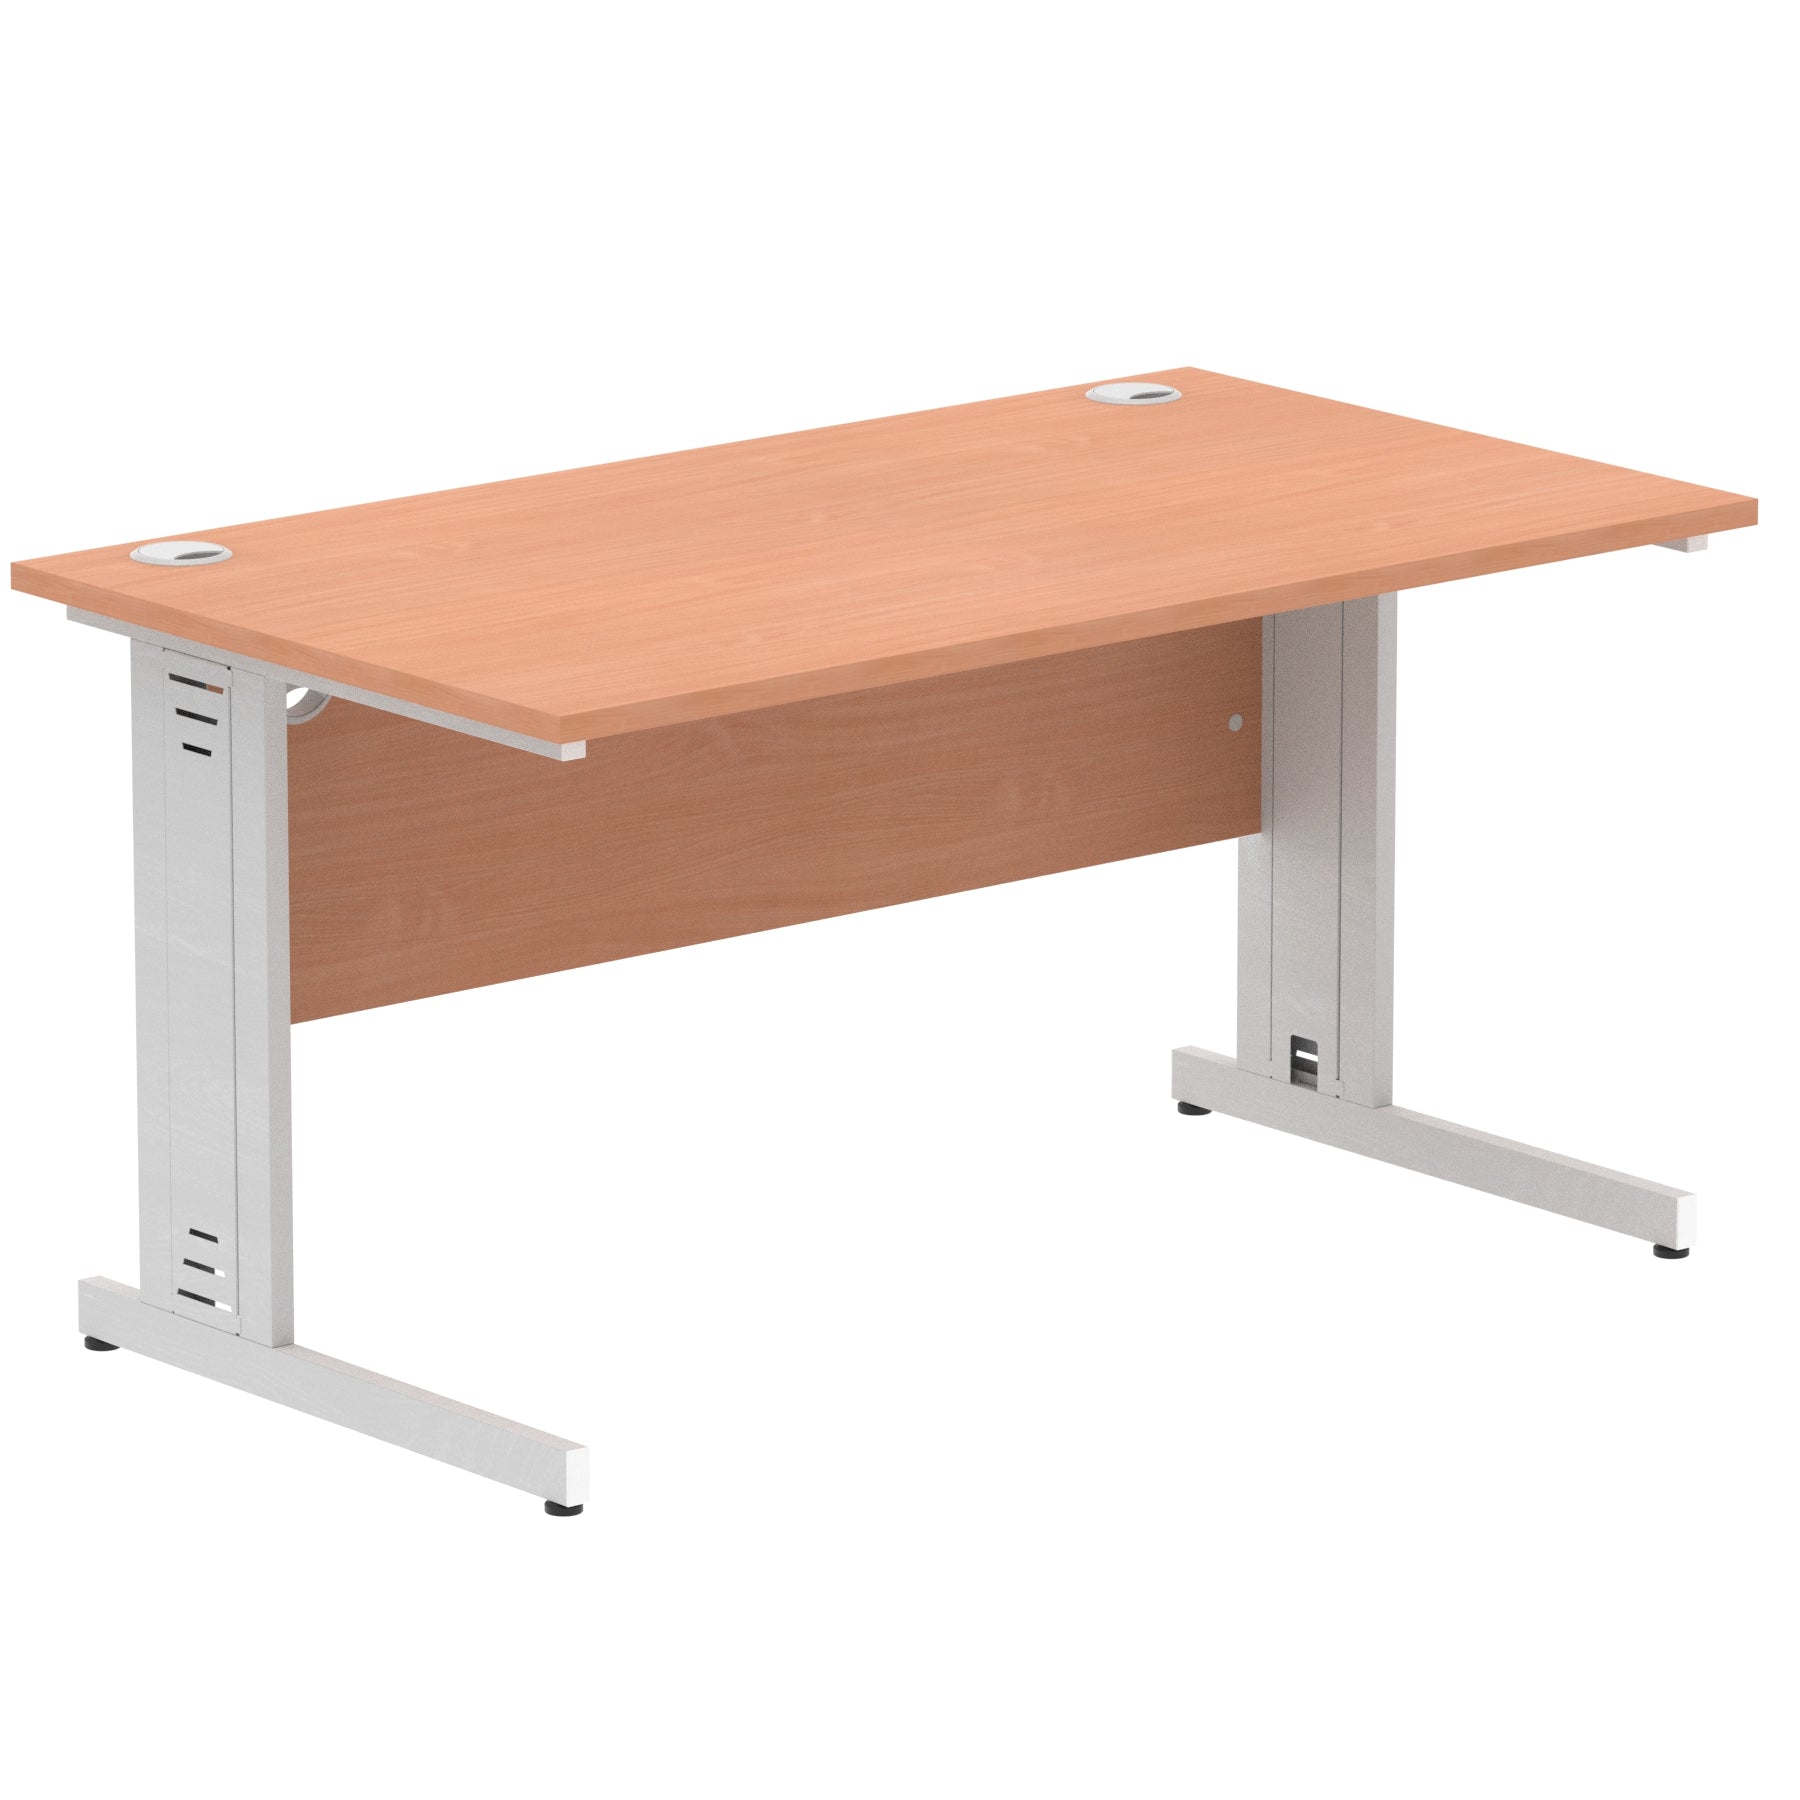 Impulse 1400mm Straight Desk with Cable Managed Leg - MFC Rectangular Table, 5-Year Guarantee, Self-Assembly, 1400x800mm Top, Silver/White Frame